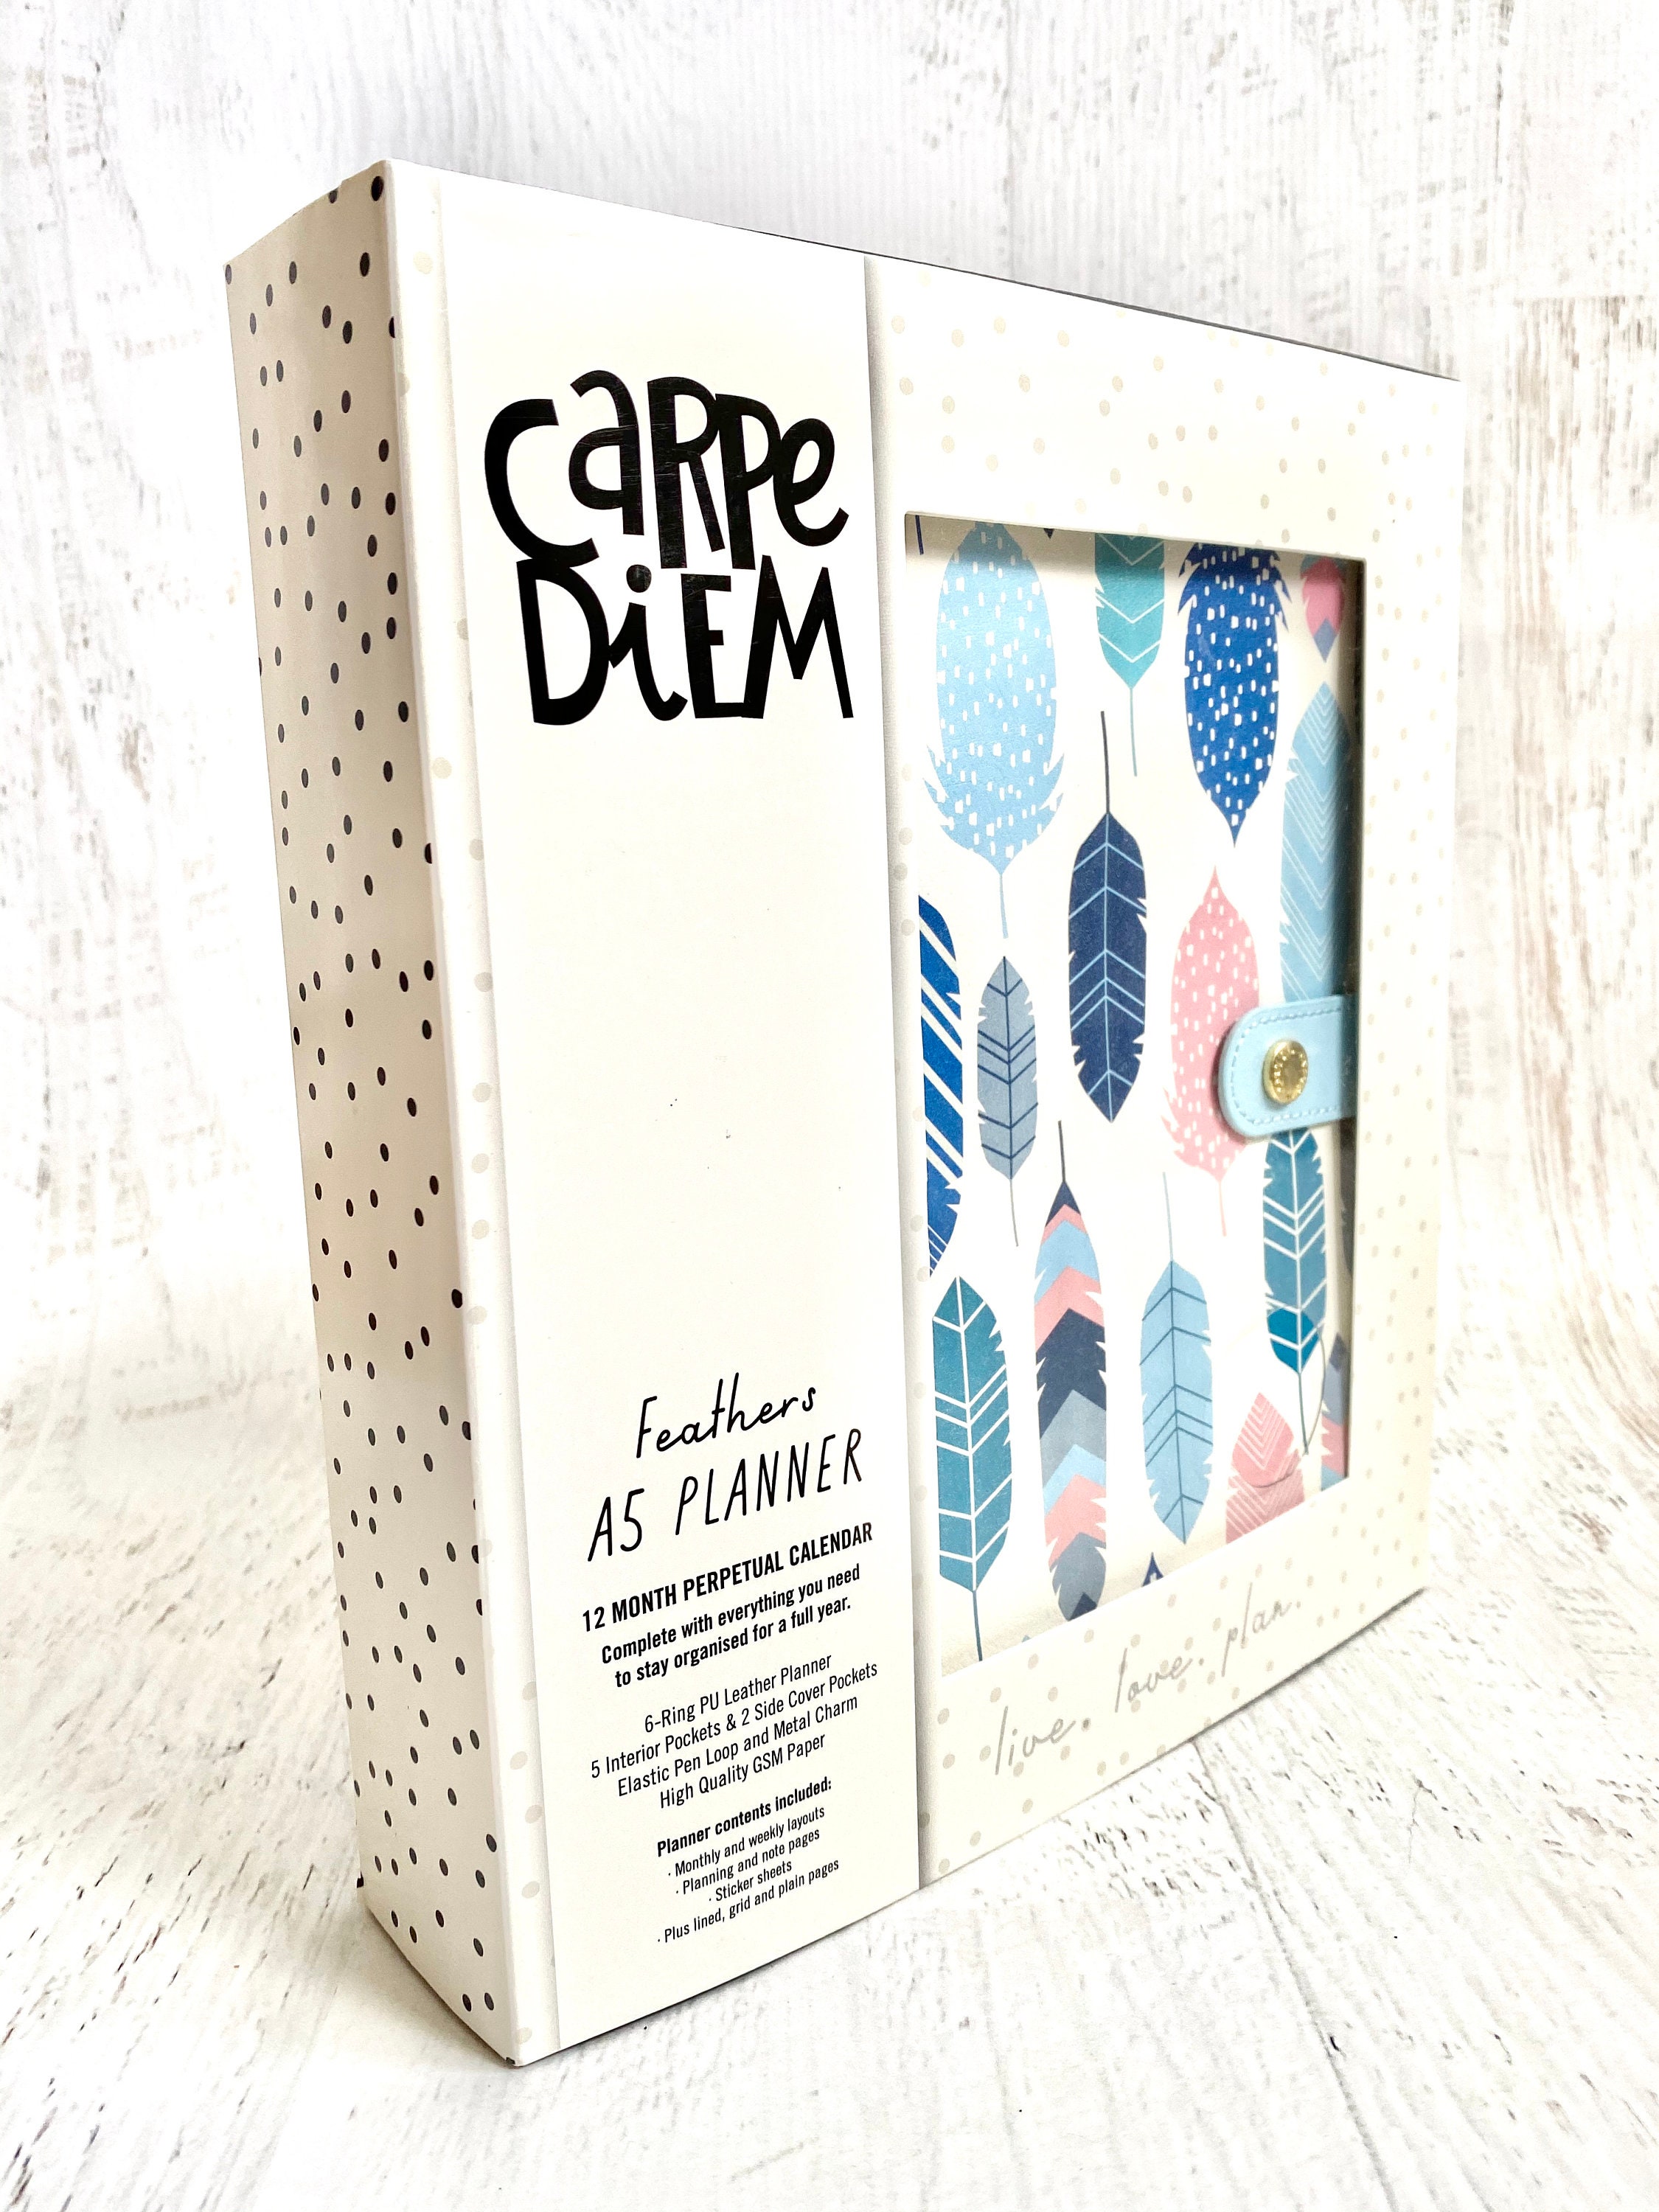 Carpe Diem Planner Feathers Boxed Set, A5, 6 Ring Simulated Leather W/ 4  Interior Pockets, 2 Side Pockets, Elastic Pen Loop, & Charm 